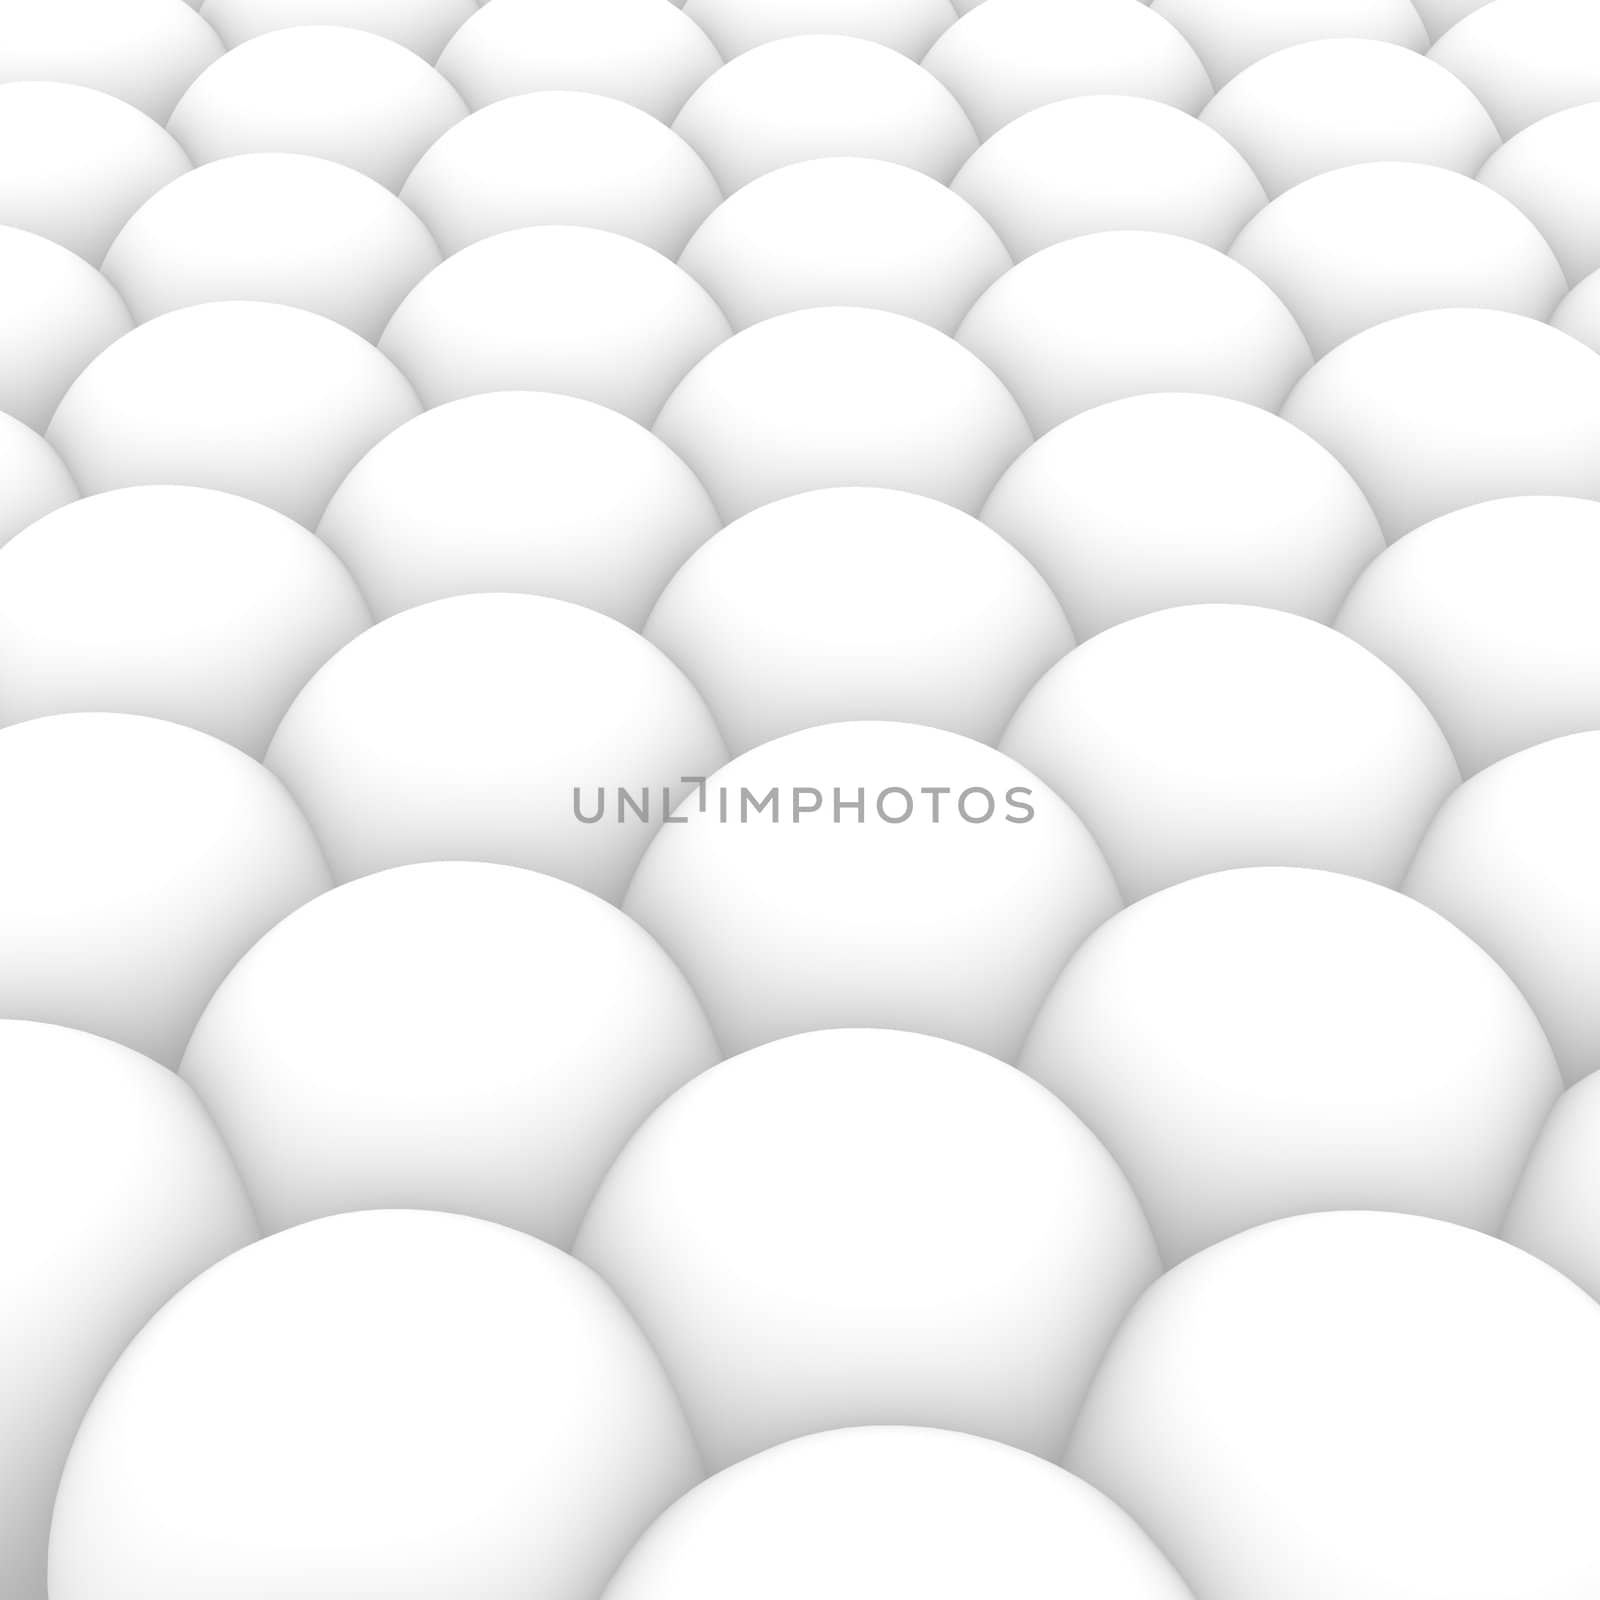 Spheres pattern abstract background. 3d rendered image.